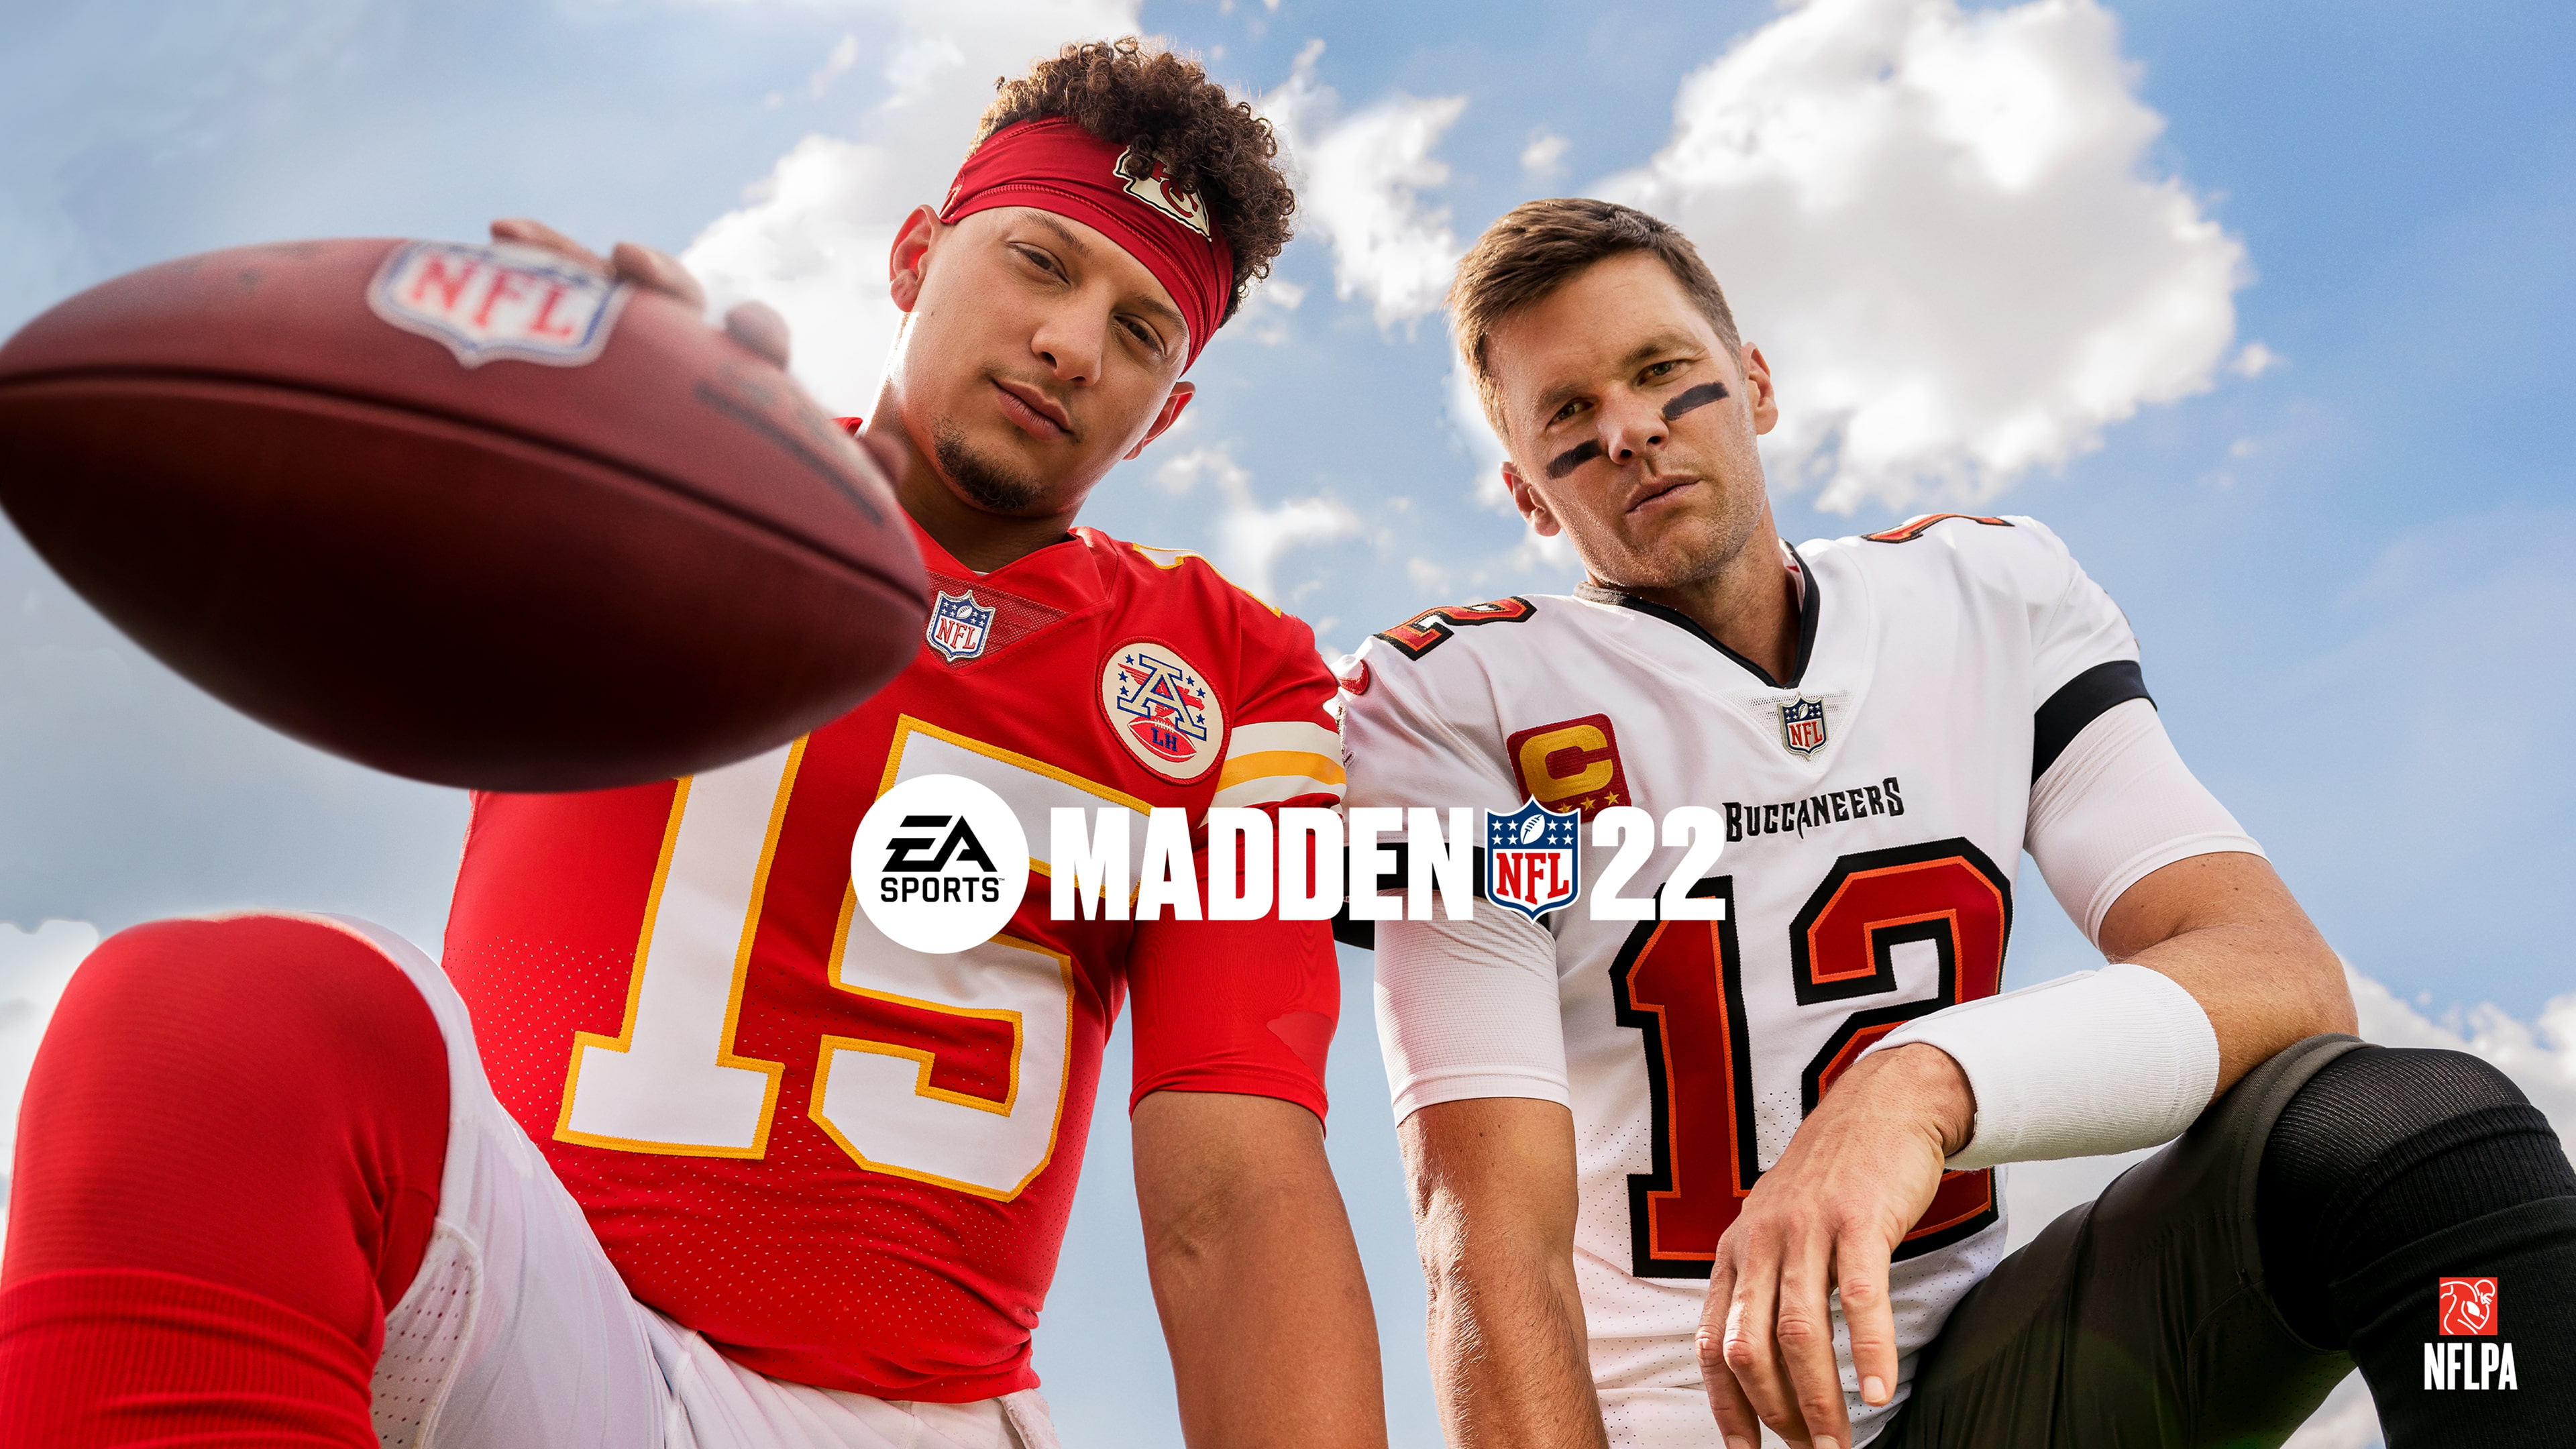 ps5 game madden